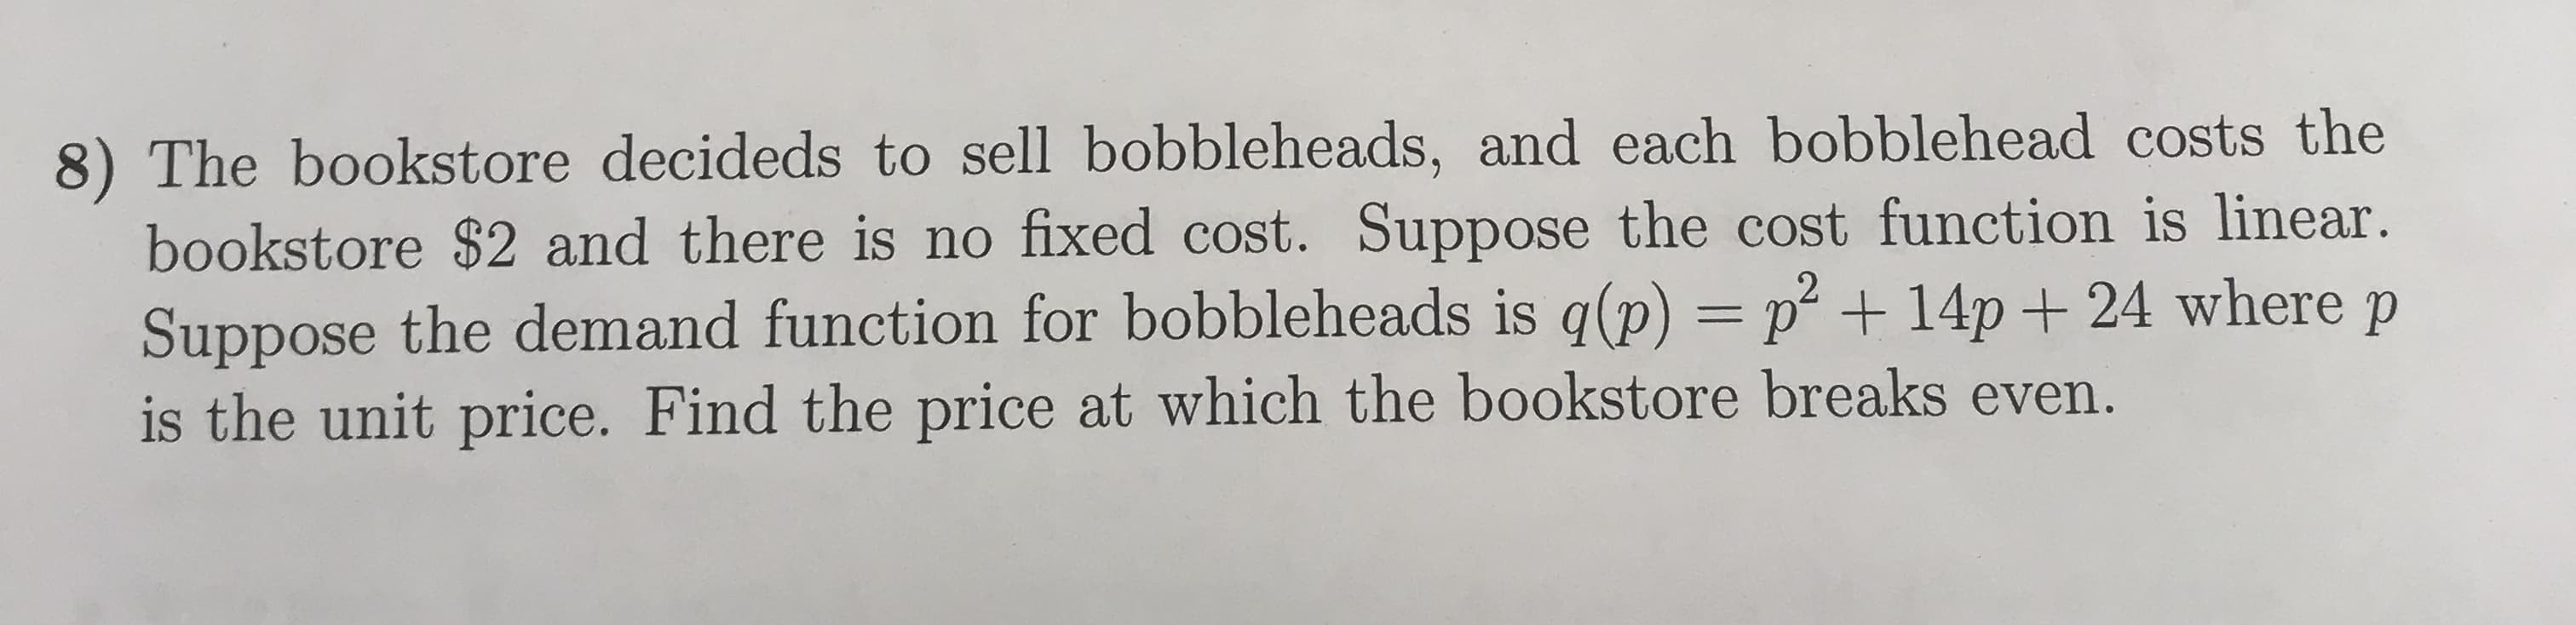 8) The bookstore decideds to sell bobbleheads, and each bobblehead costs the
bookstore $2 and there is no fixed cost. Suppose the cost function is linear.
Suppose the demand function for bobbleheads is qp) + 14p + 24 where p
is the unit price. Find the price at which the bookstore breaks even.
